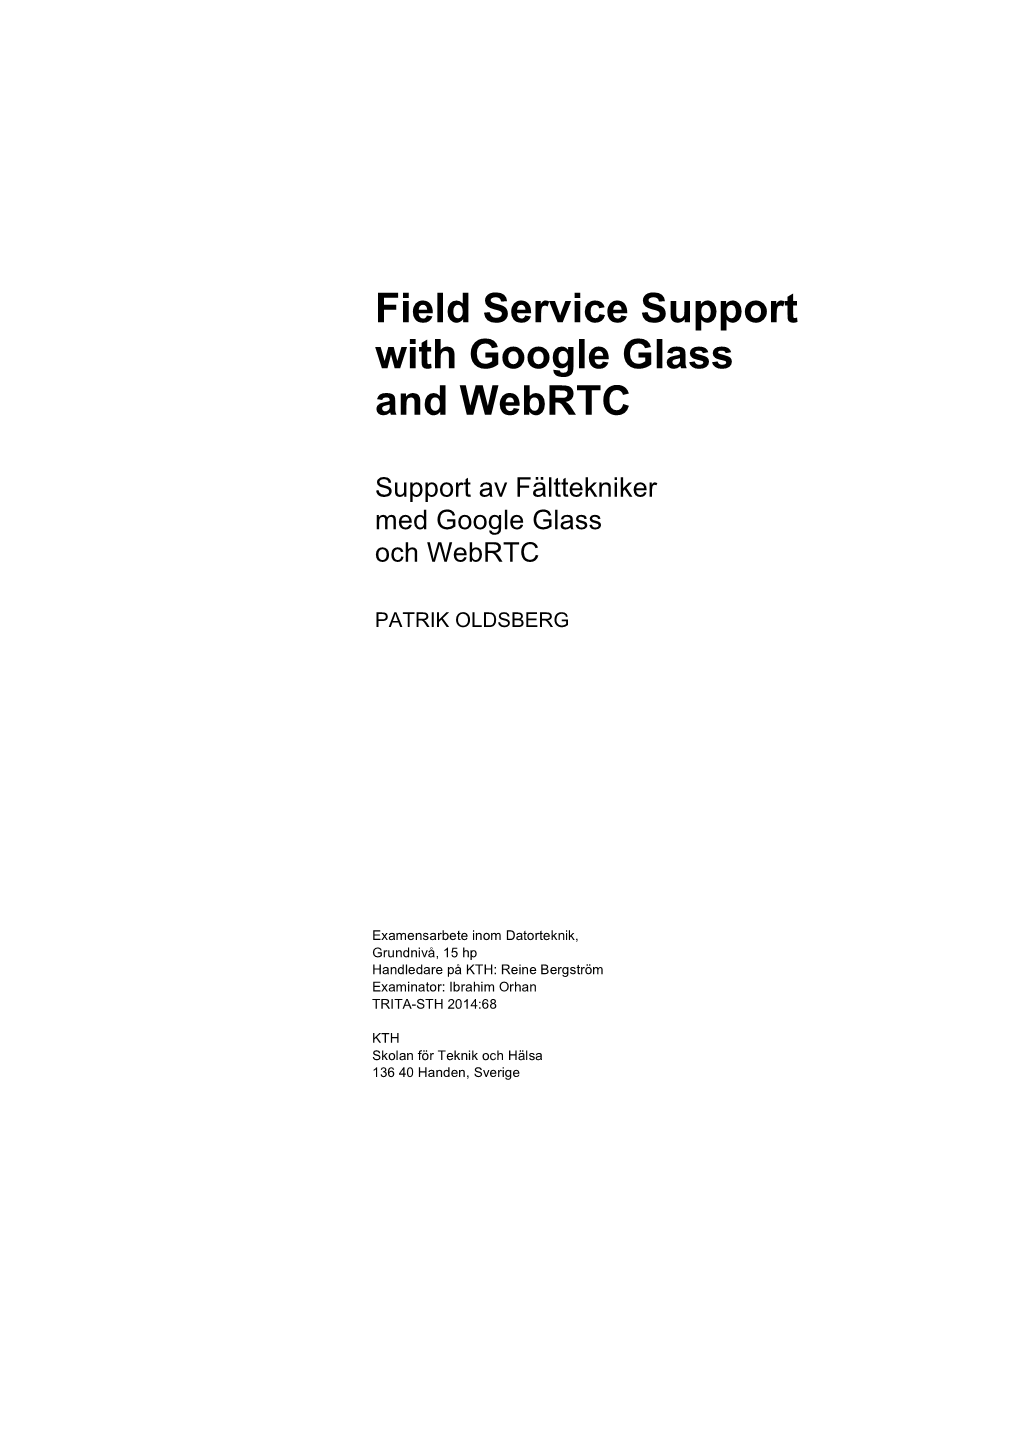 Field Service Support with Google Glass and Webrtc